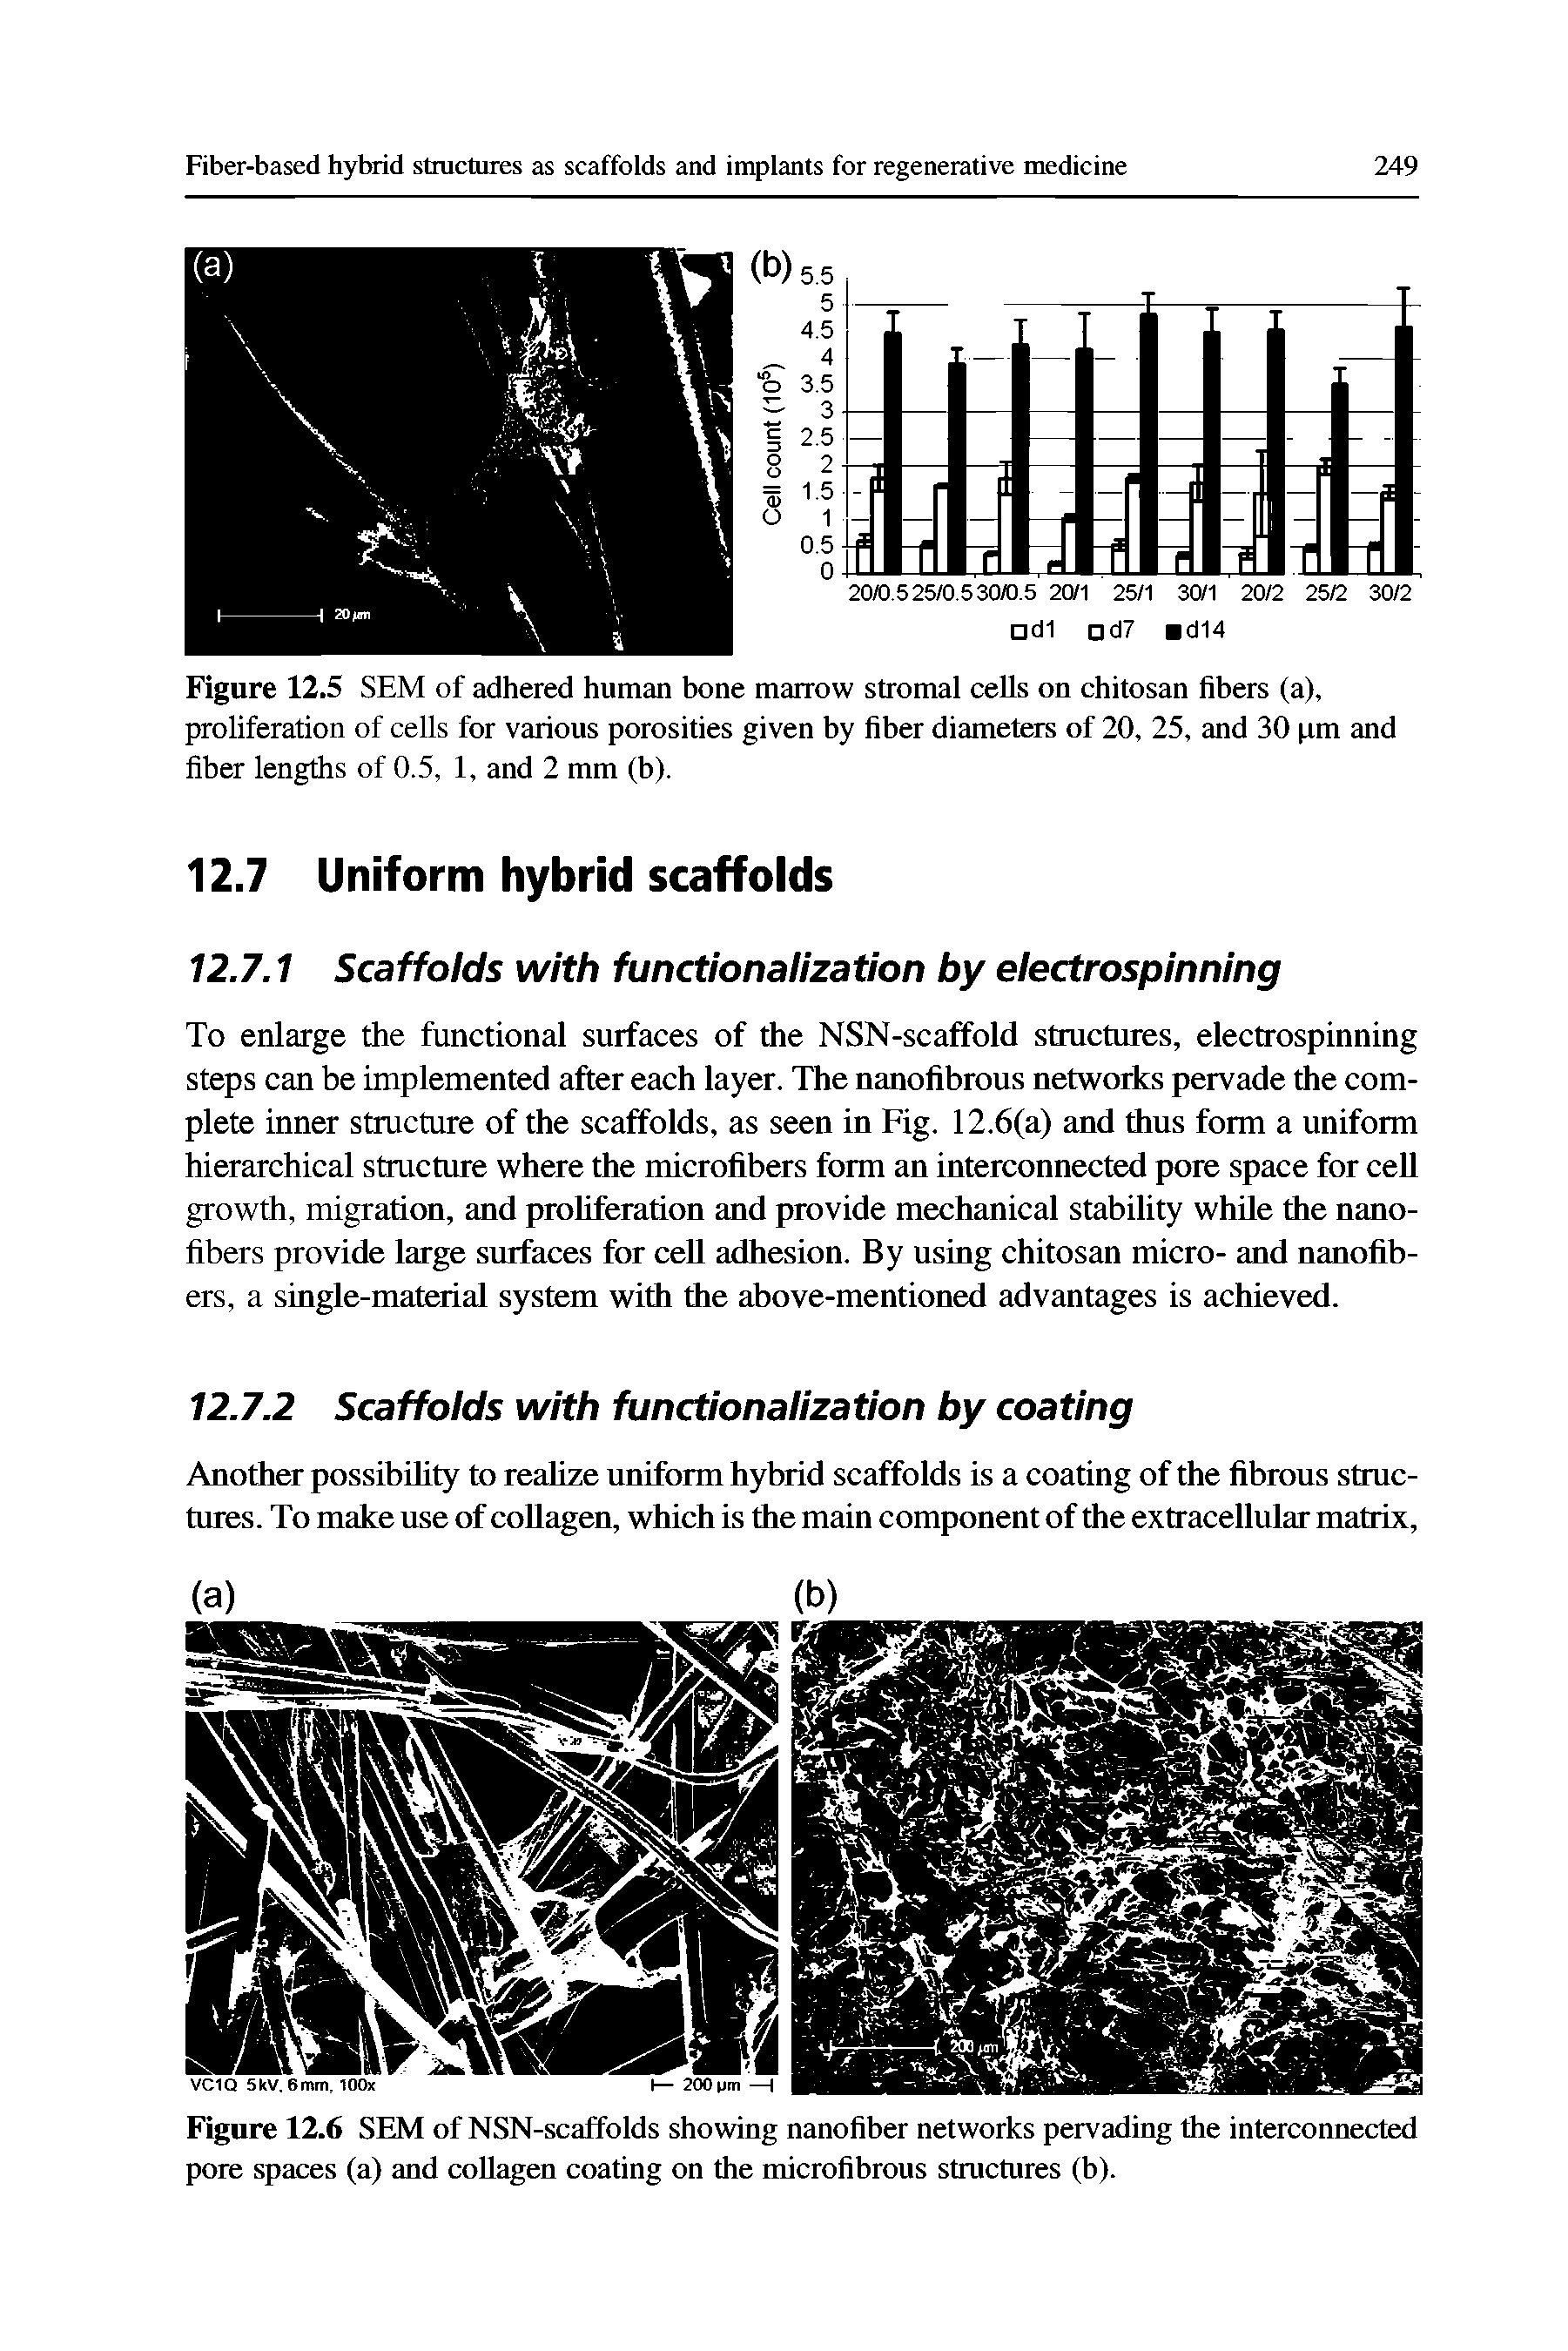 Figure 12.6 SEM of NSN-scaffolds showing nanofiber networks pervading the interconnected pore spaces (a) and collagen coating on the microfibrous structures (b).